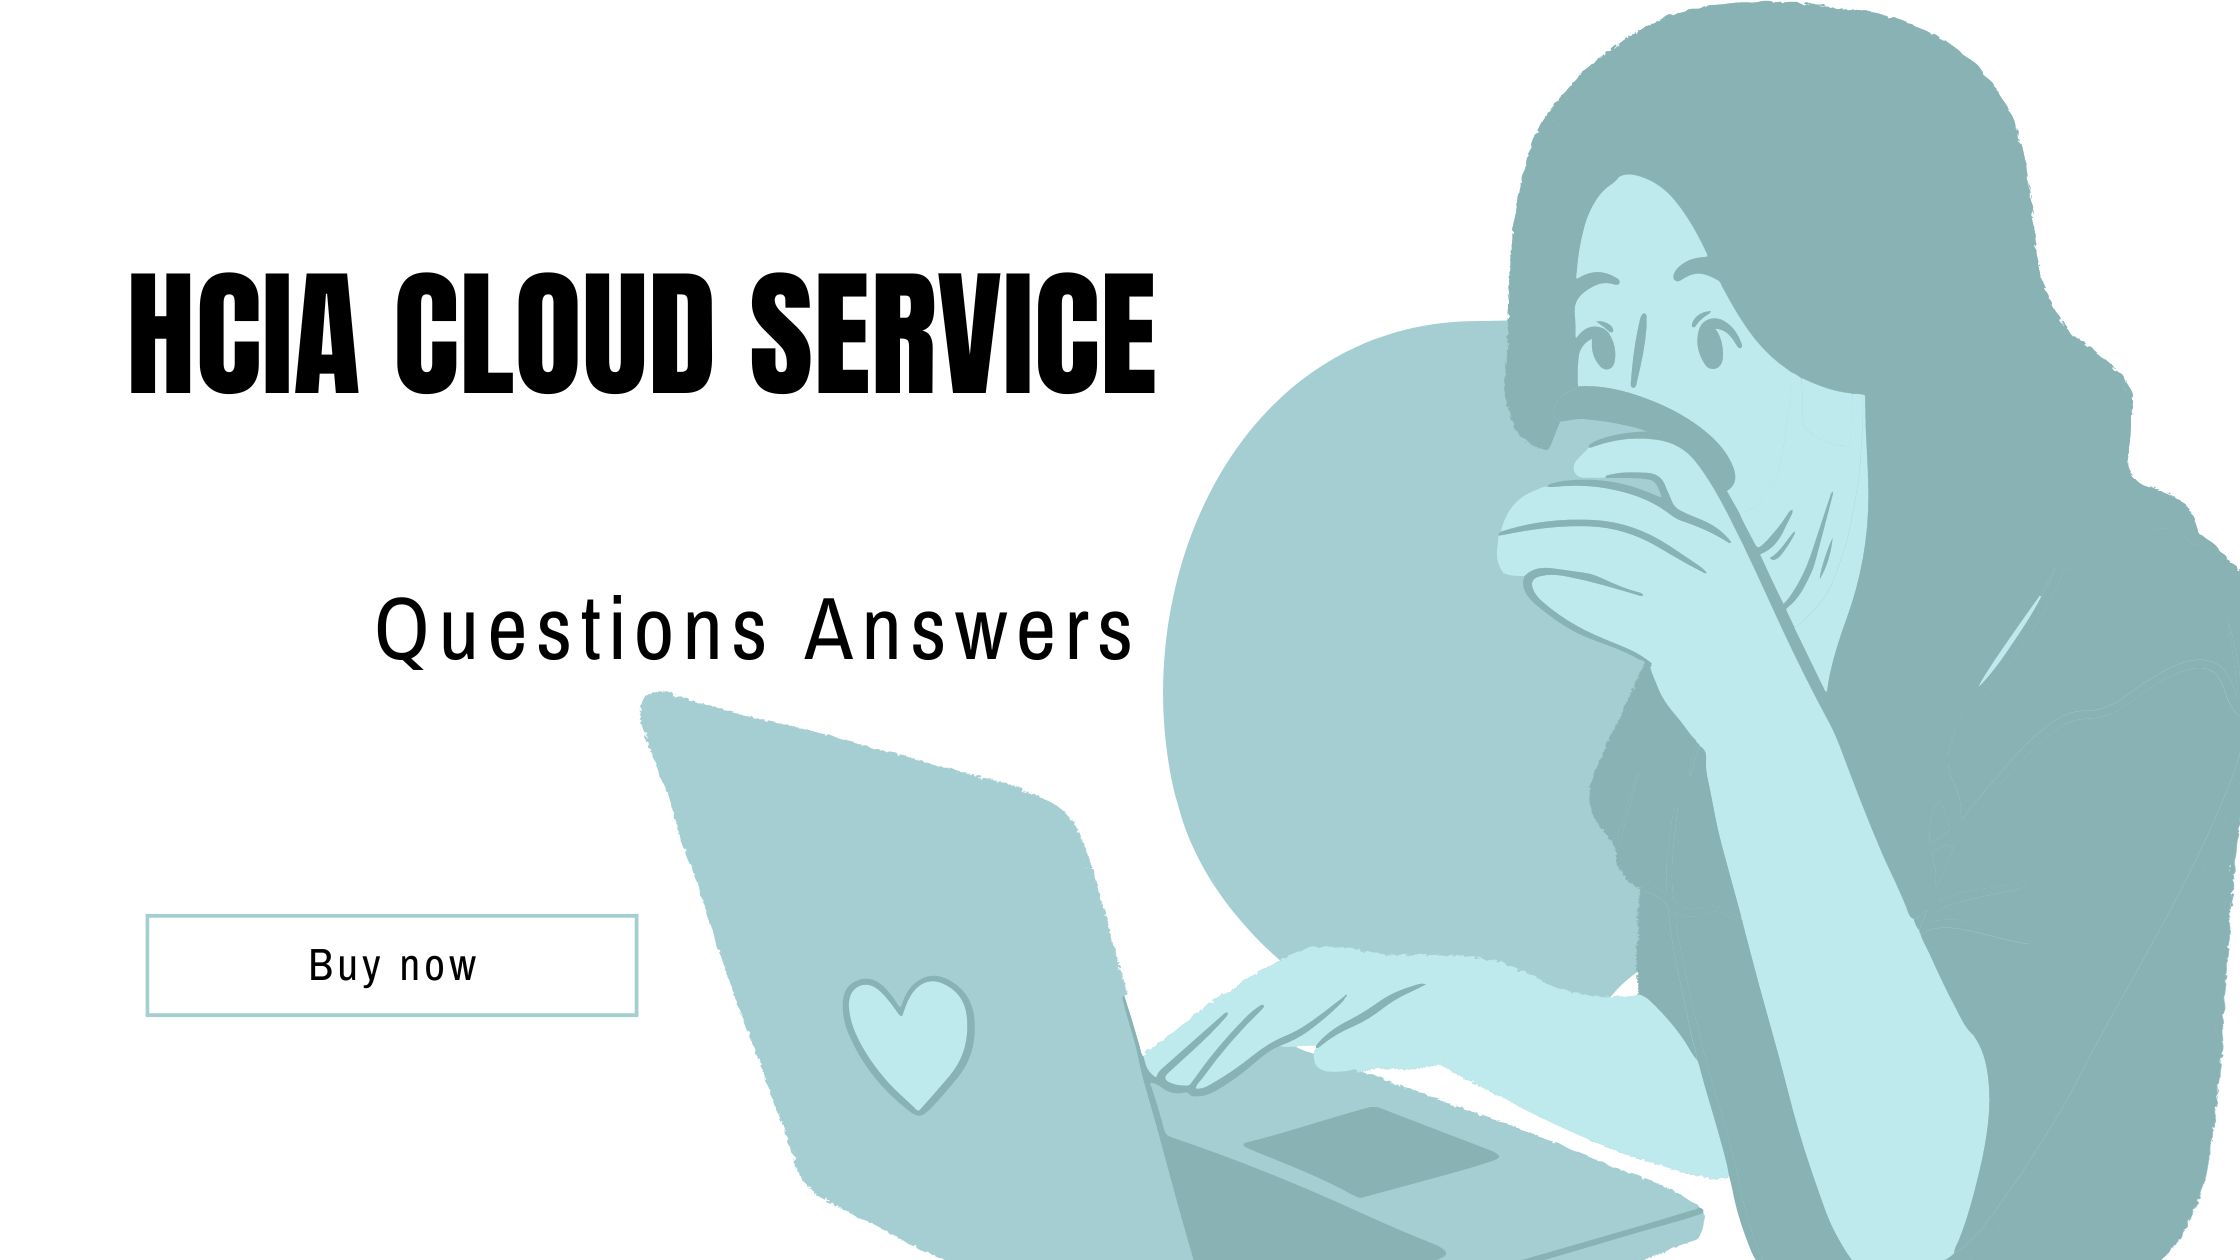 HCIA Cloud Service questions answers